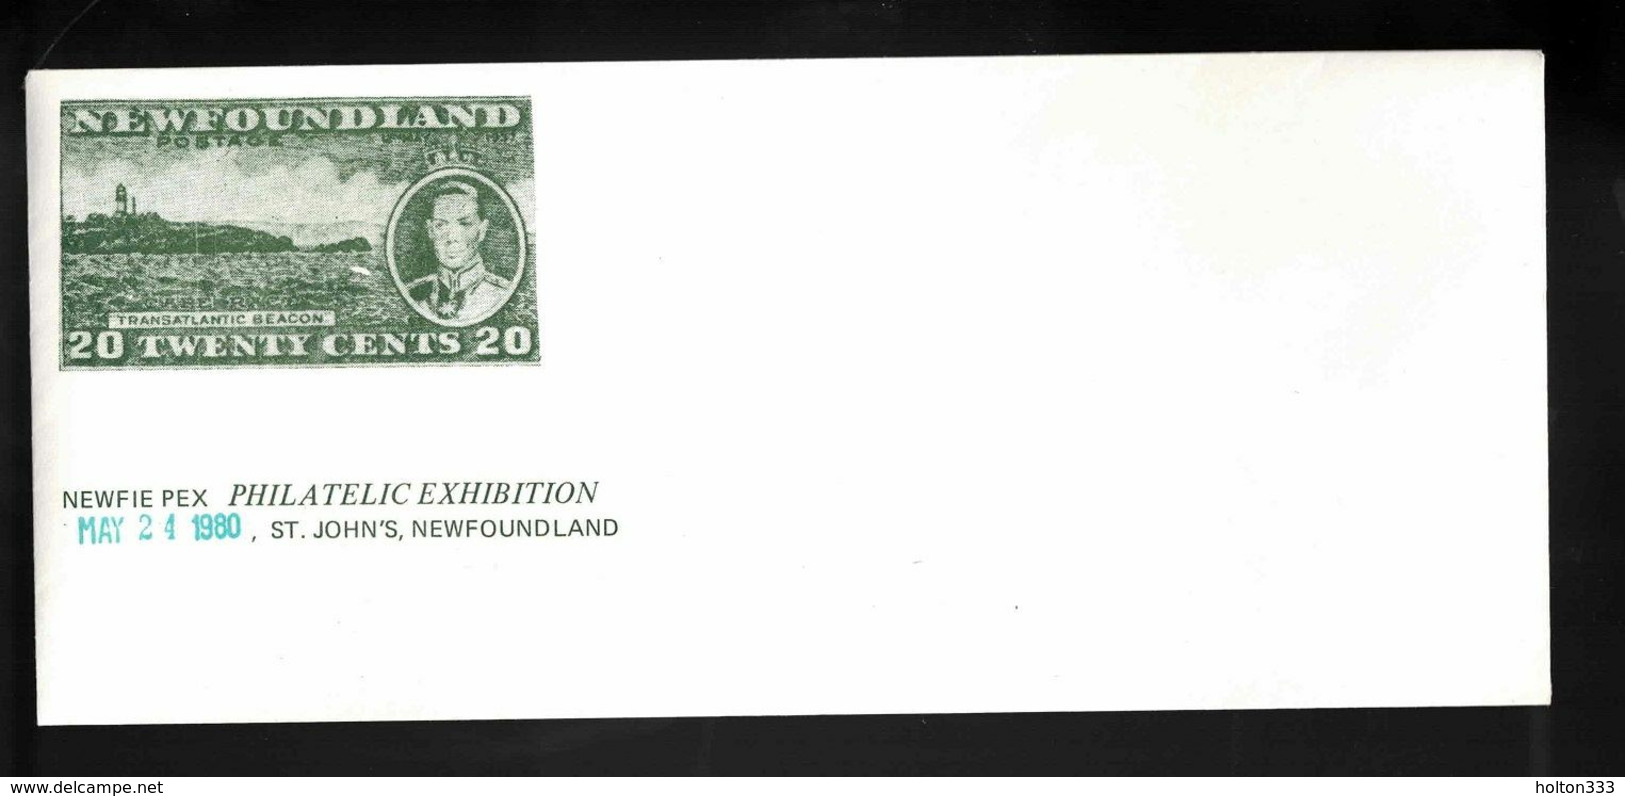 NEWFOUNDLAND Cover Blank - Two Newfie Pex Exhibition May 1980 - Enveloppes Commémoratives